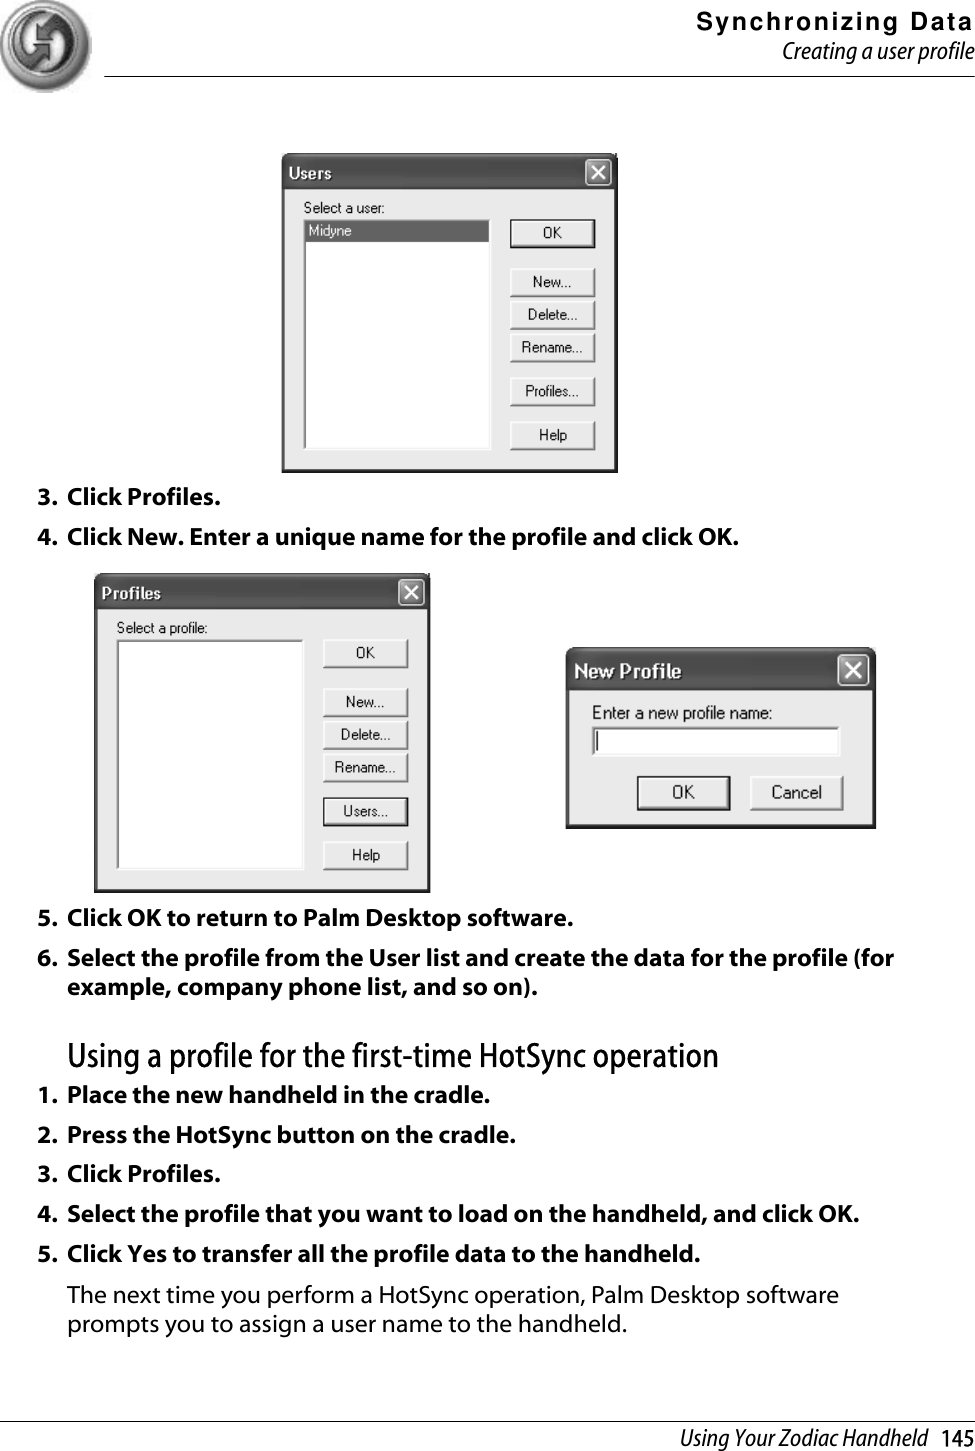 Synchronizing DataCreating a user profileUsing Your Zodiac Handheld   1453. Click Profiles. 4. Click New. Enter a unique name for the profile and click OK. 5. Click OK to return to Palm Desktop software. 6. Select the profile from the User list and create the data for the profile (for example, company phone list, and so on).Using a profile for the first-time HotSync operation1. Place the new handheld in the cradle.2. Press the HotSync button on the cradle.3. Click Profiles.4. Select the profile that you want to load on the handheld, and click OK.5. Click Yes to transfer all the profile data to the handheld.The next time you perform a HotSync operation, Palm Desktop software prompts you to assign a user name to the handheld.